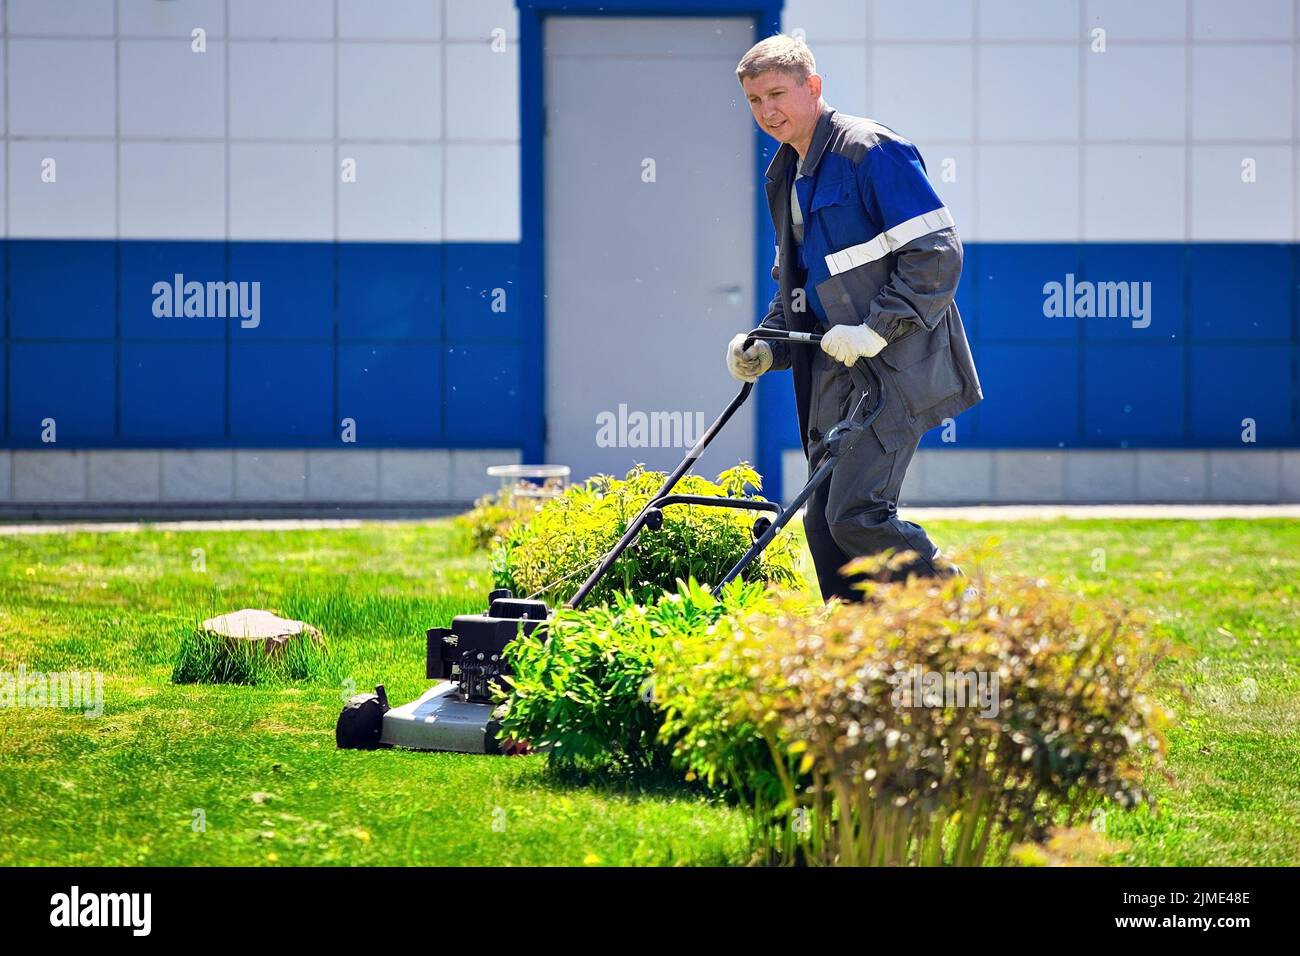 A young man walks with a lawn mower on a green lawn in a production area. Stock Photo